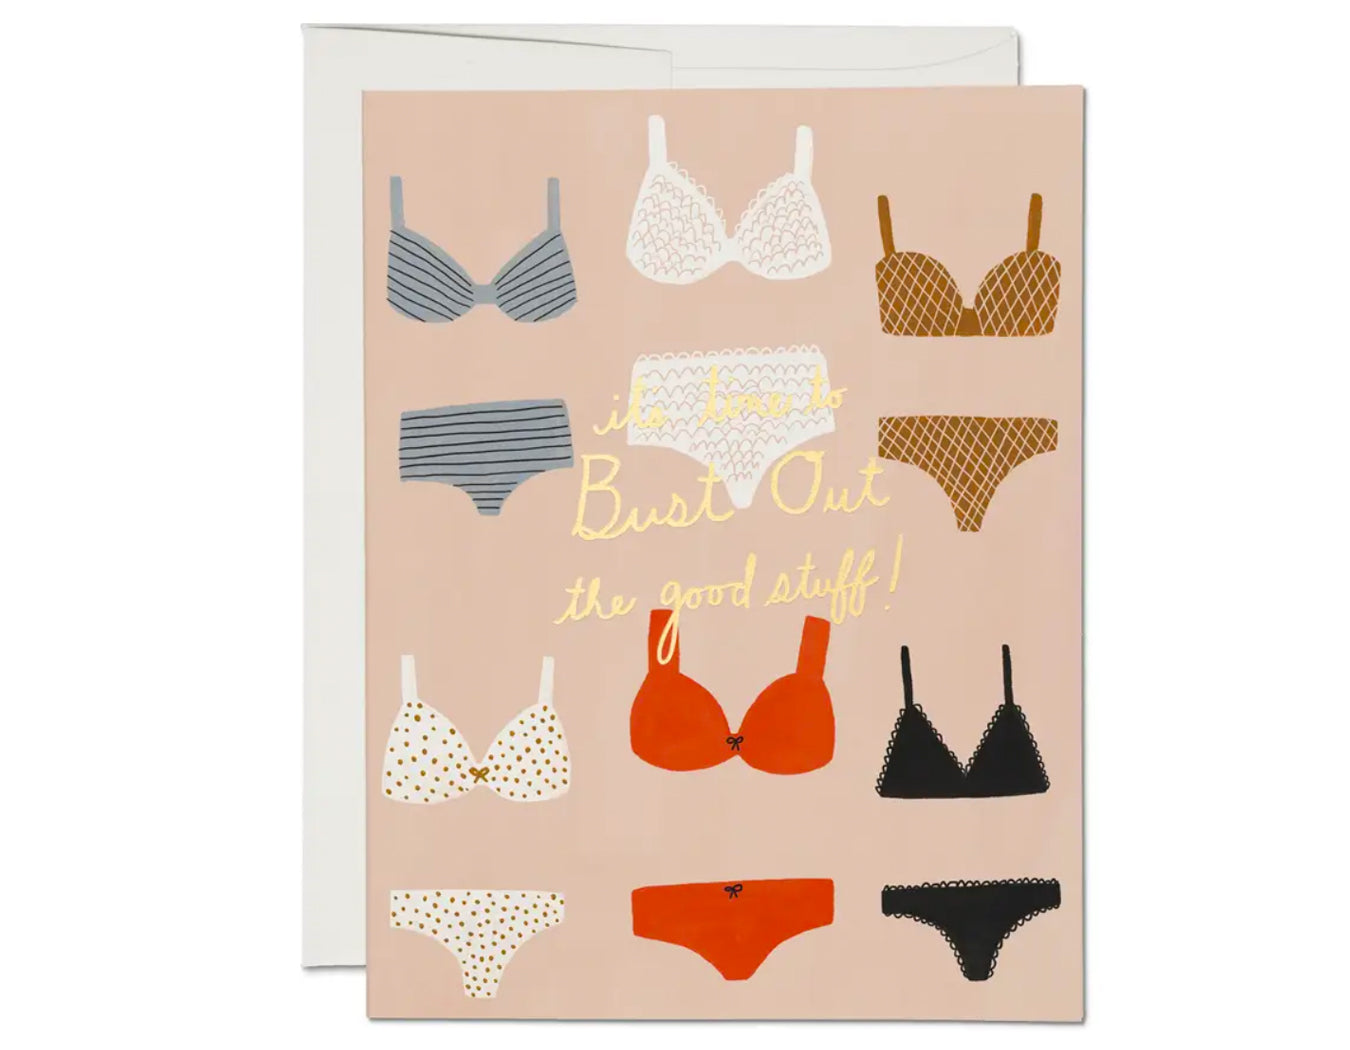 cards features illustration of different lingerie sets, text reads it's time to bust out the good stuff!